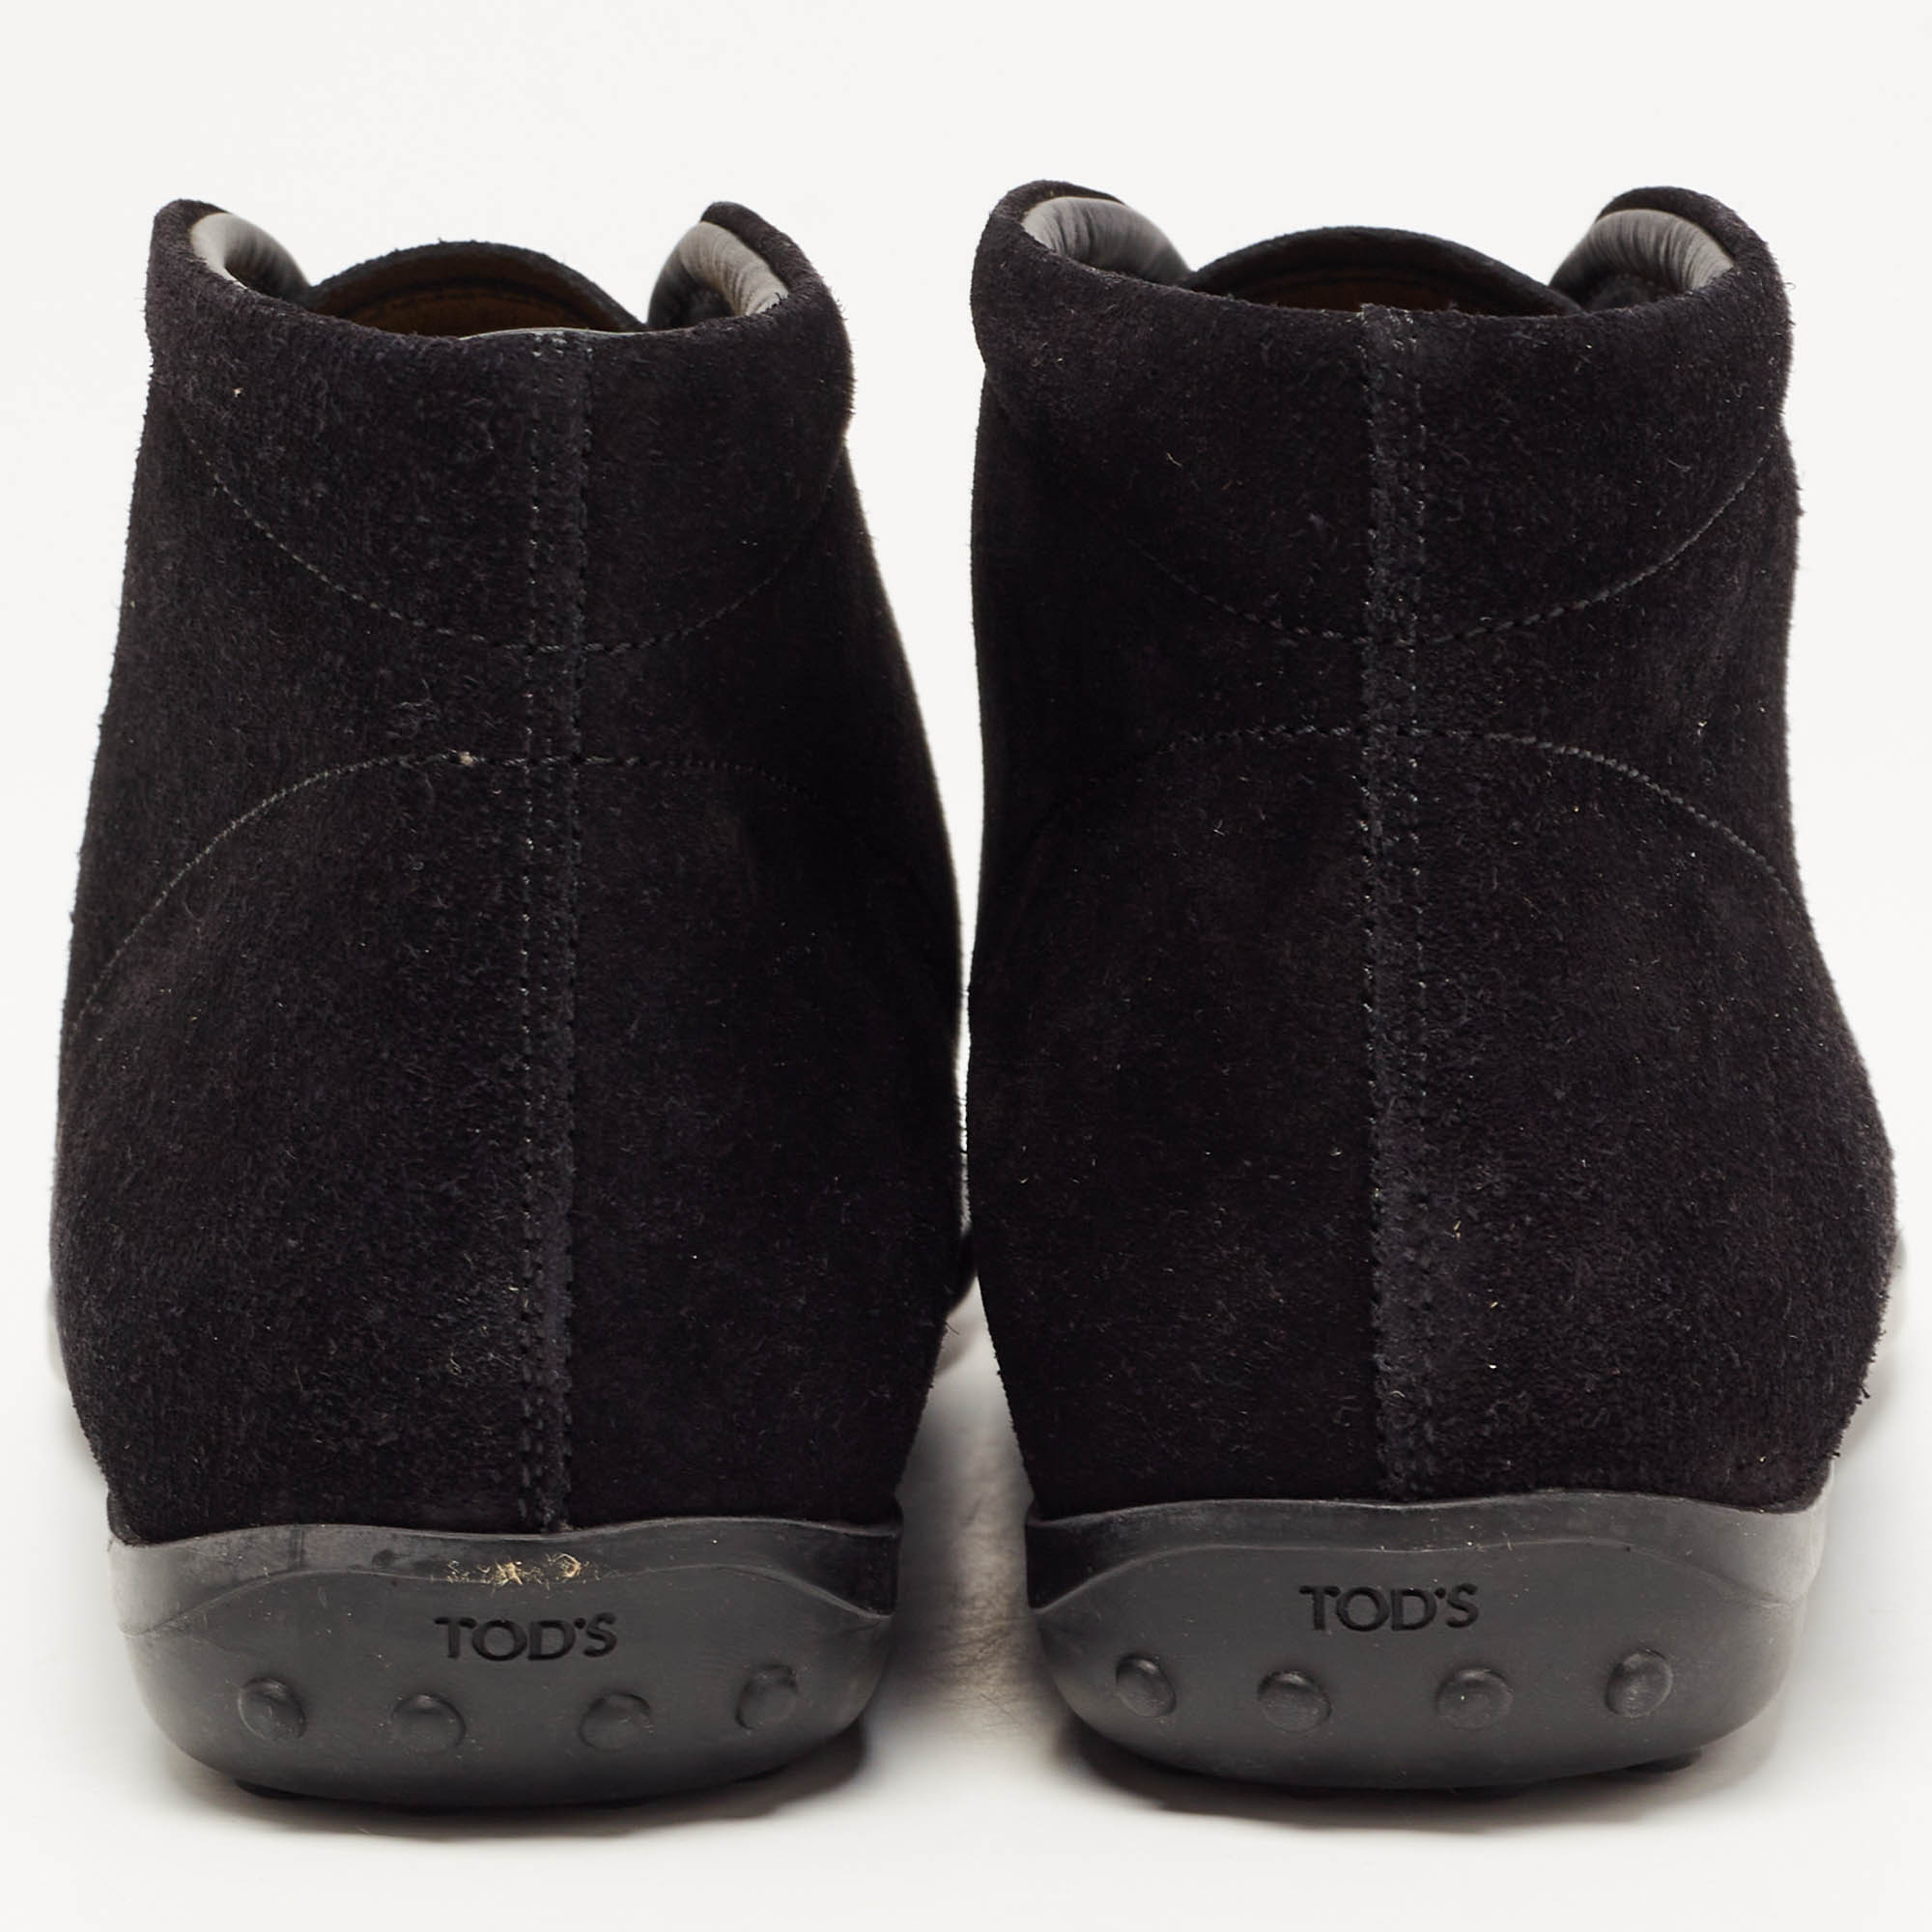 Tod's Black Suede Ankle Length Boots Size 39